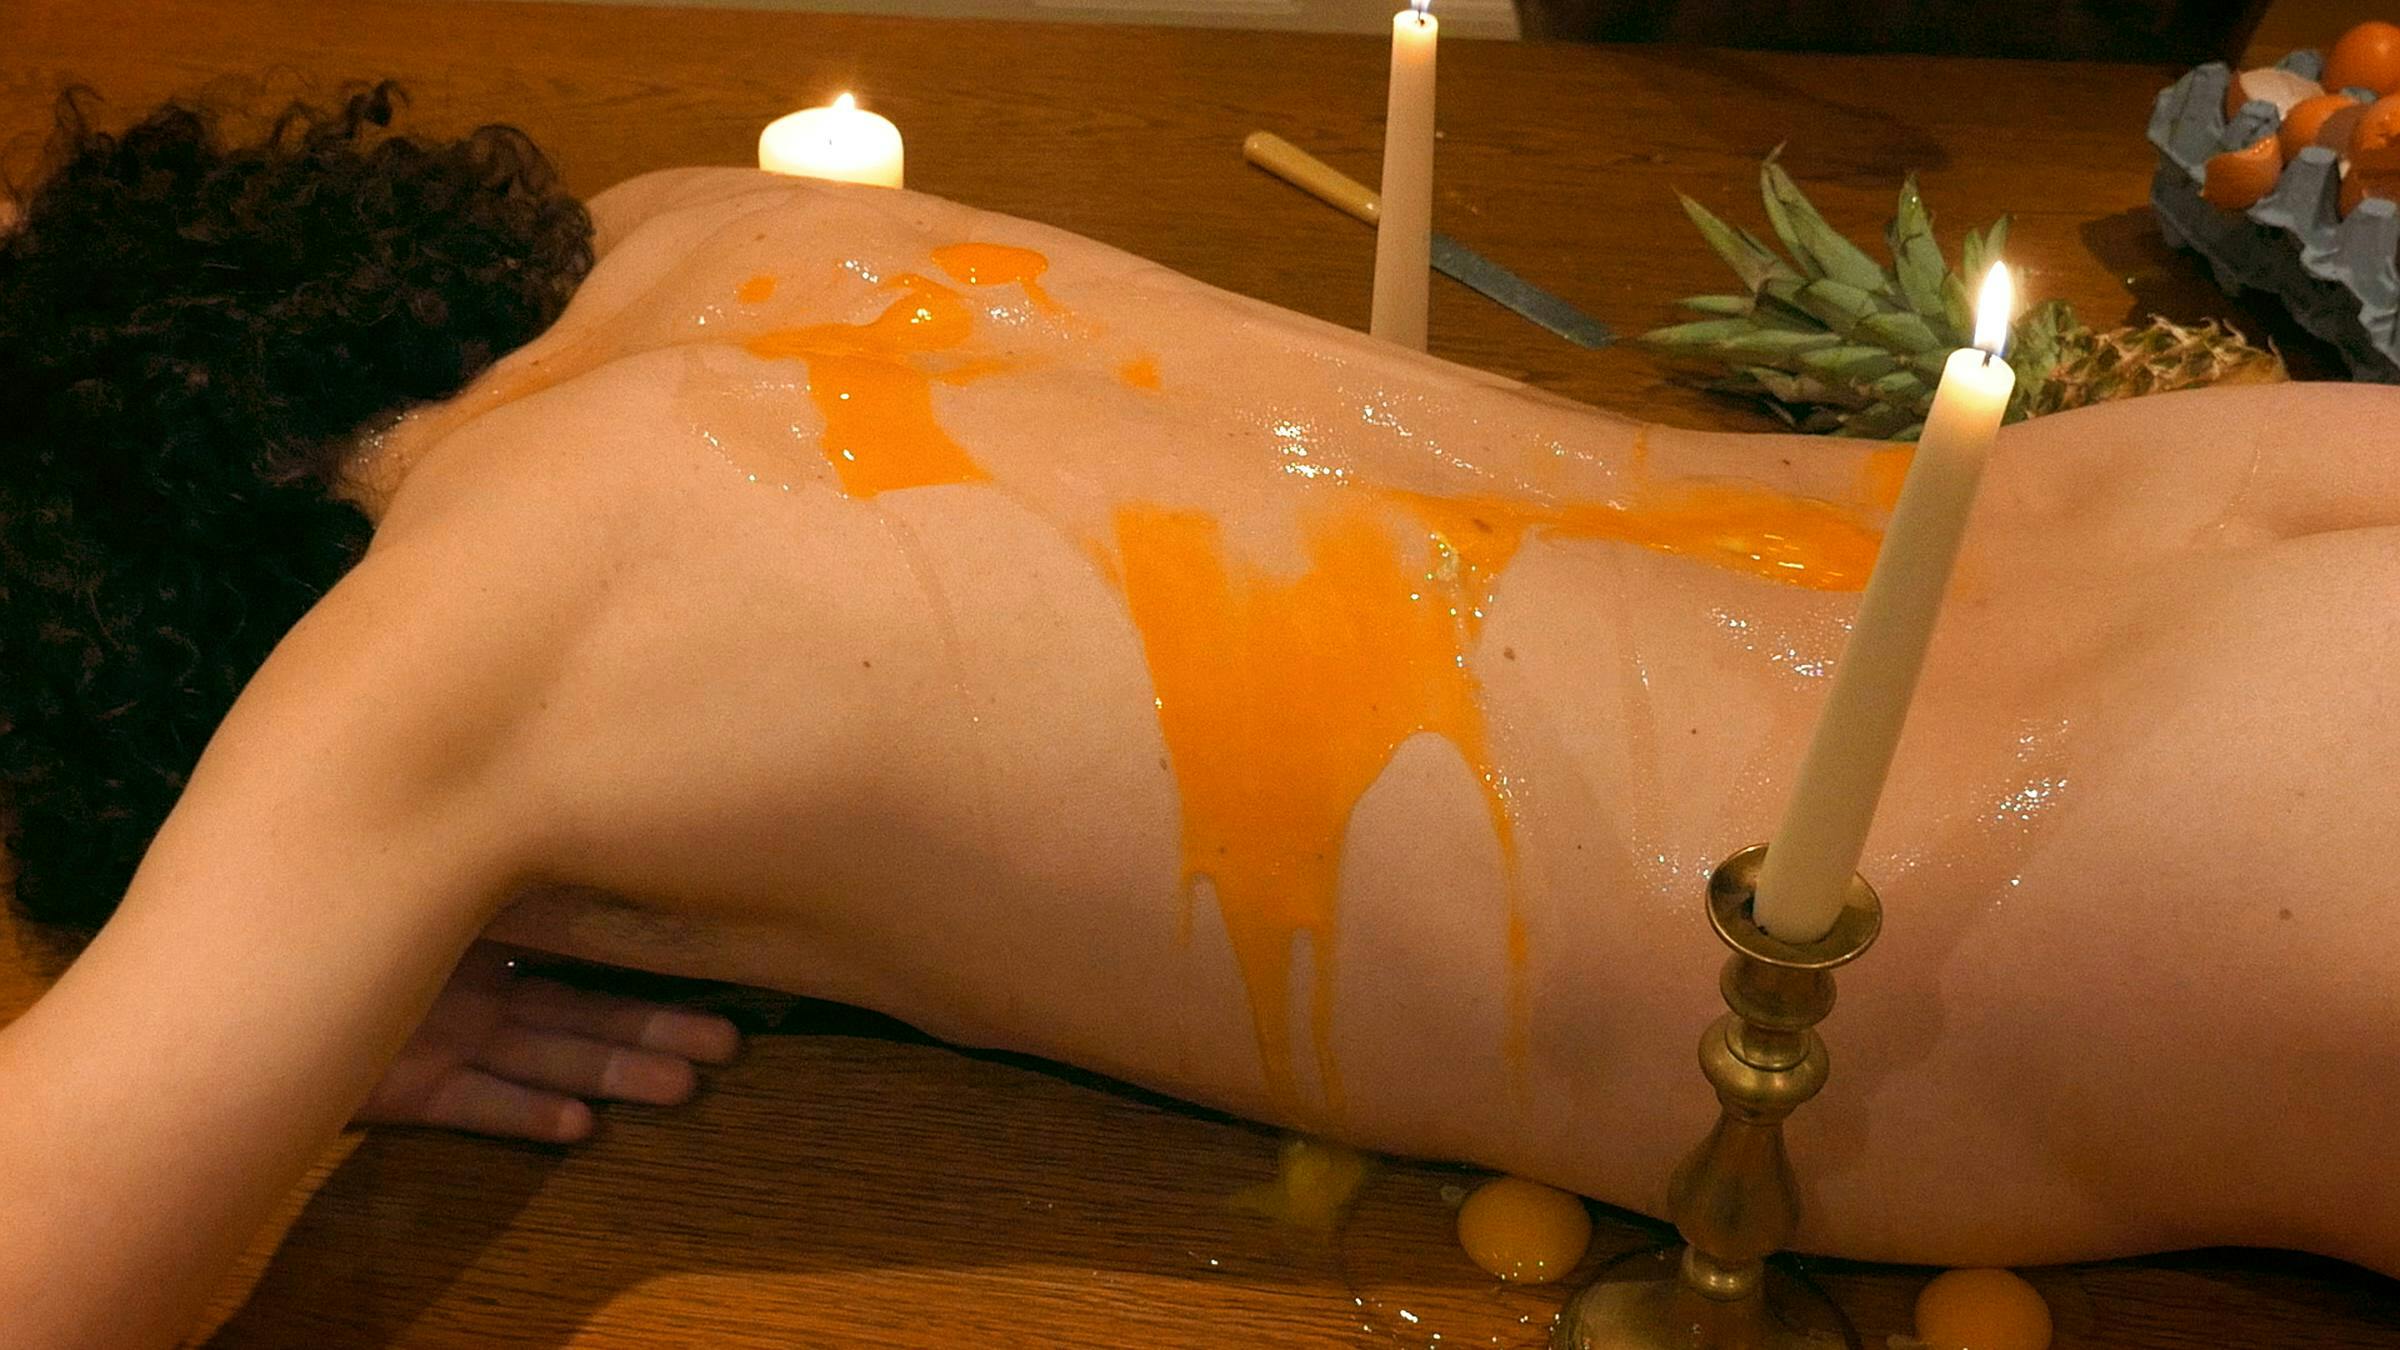 A person lies naked on their front with their head down. Their back is covered in a yellow liquid and raw eggs are by their sides. There are candles around them and a pineapple.